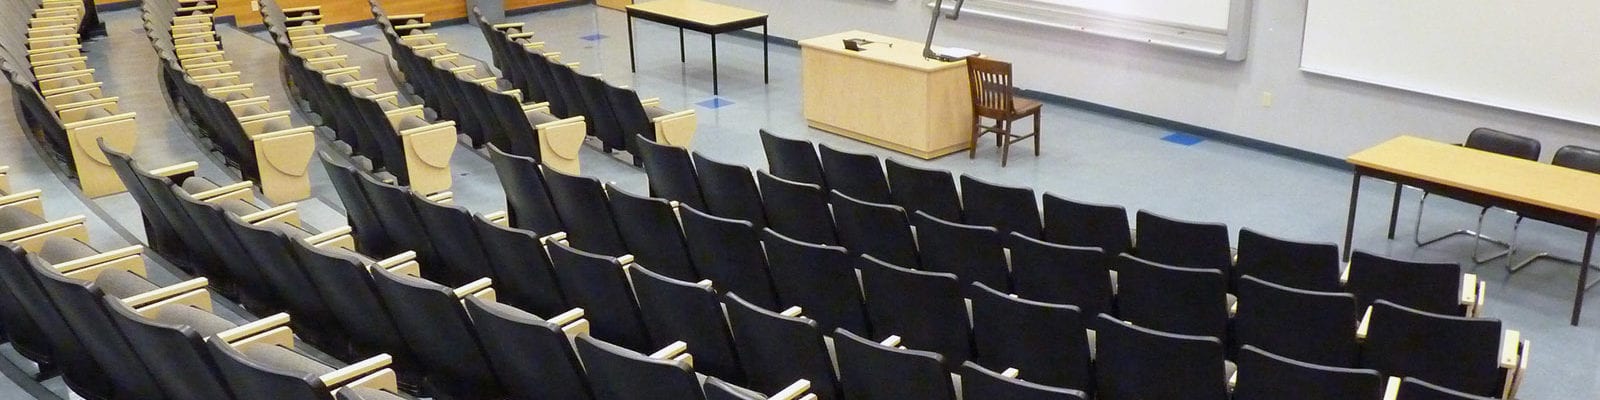 An empty university lecture room.